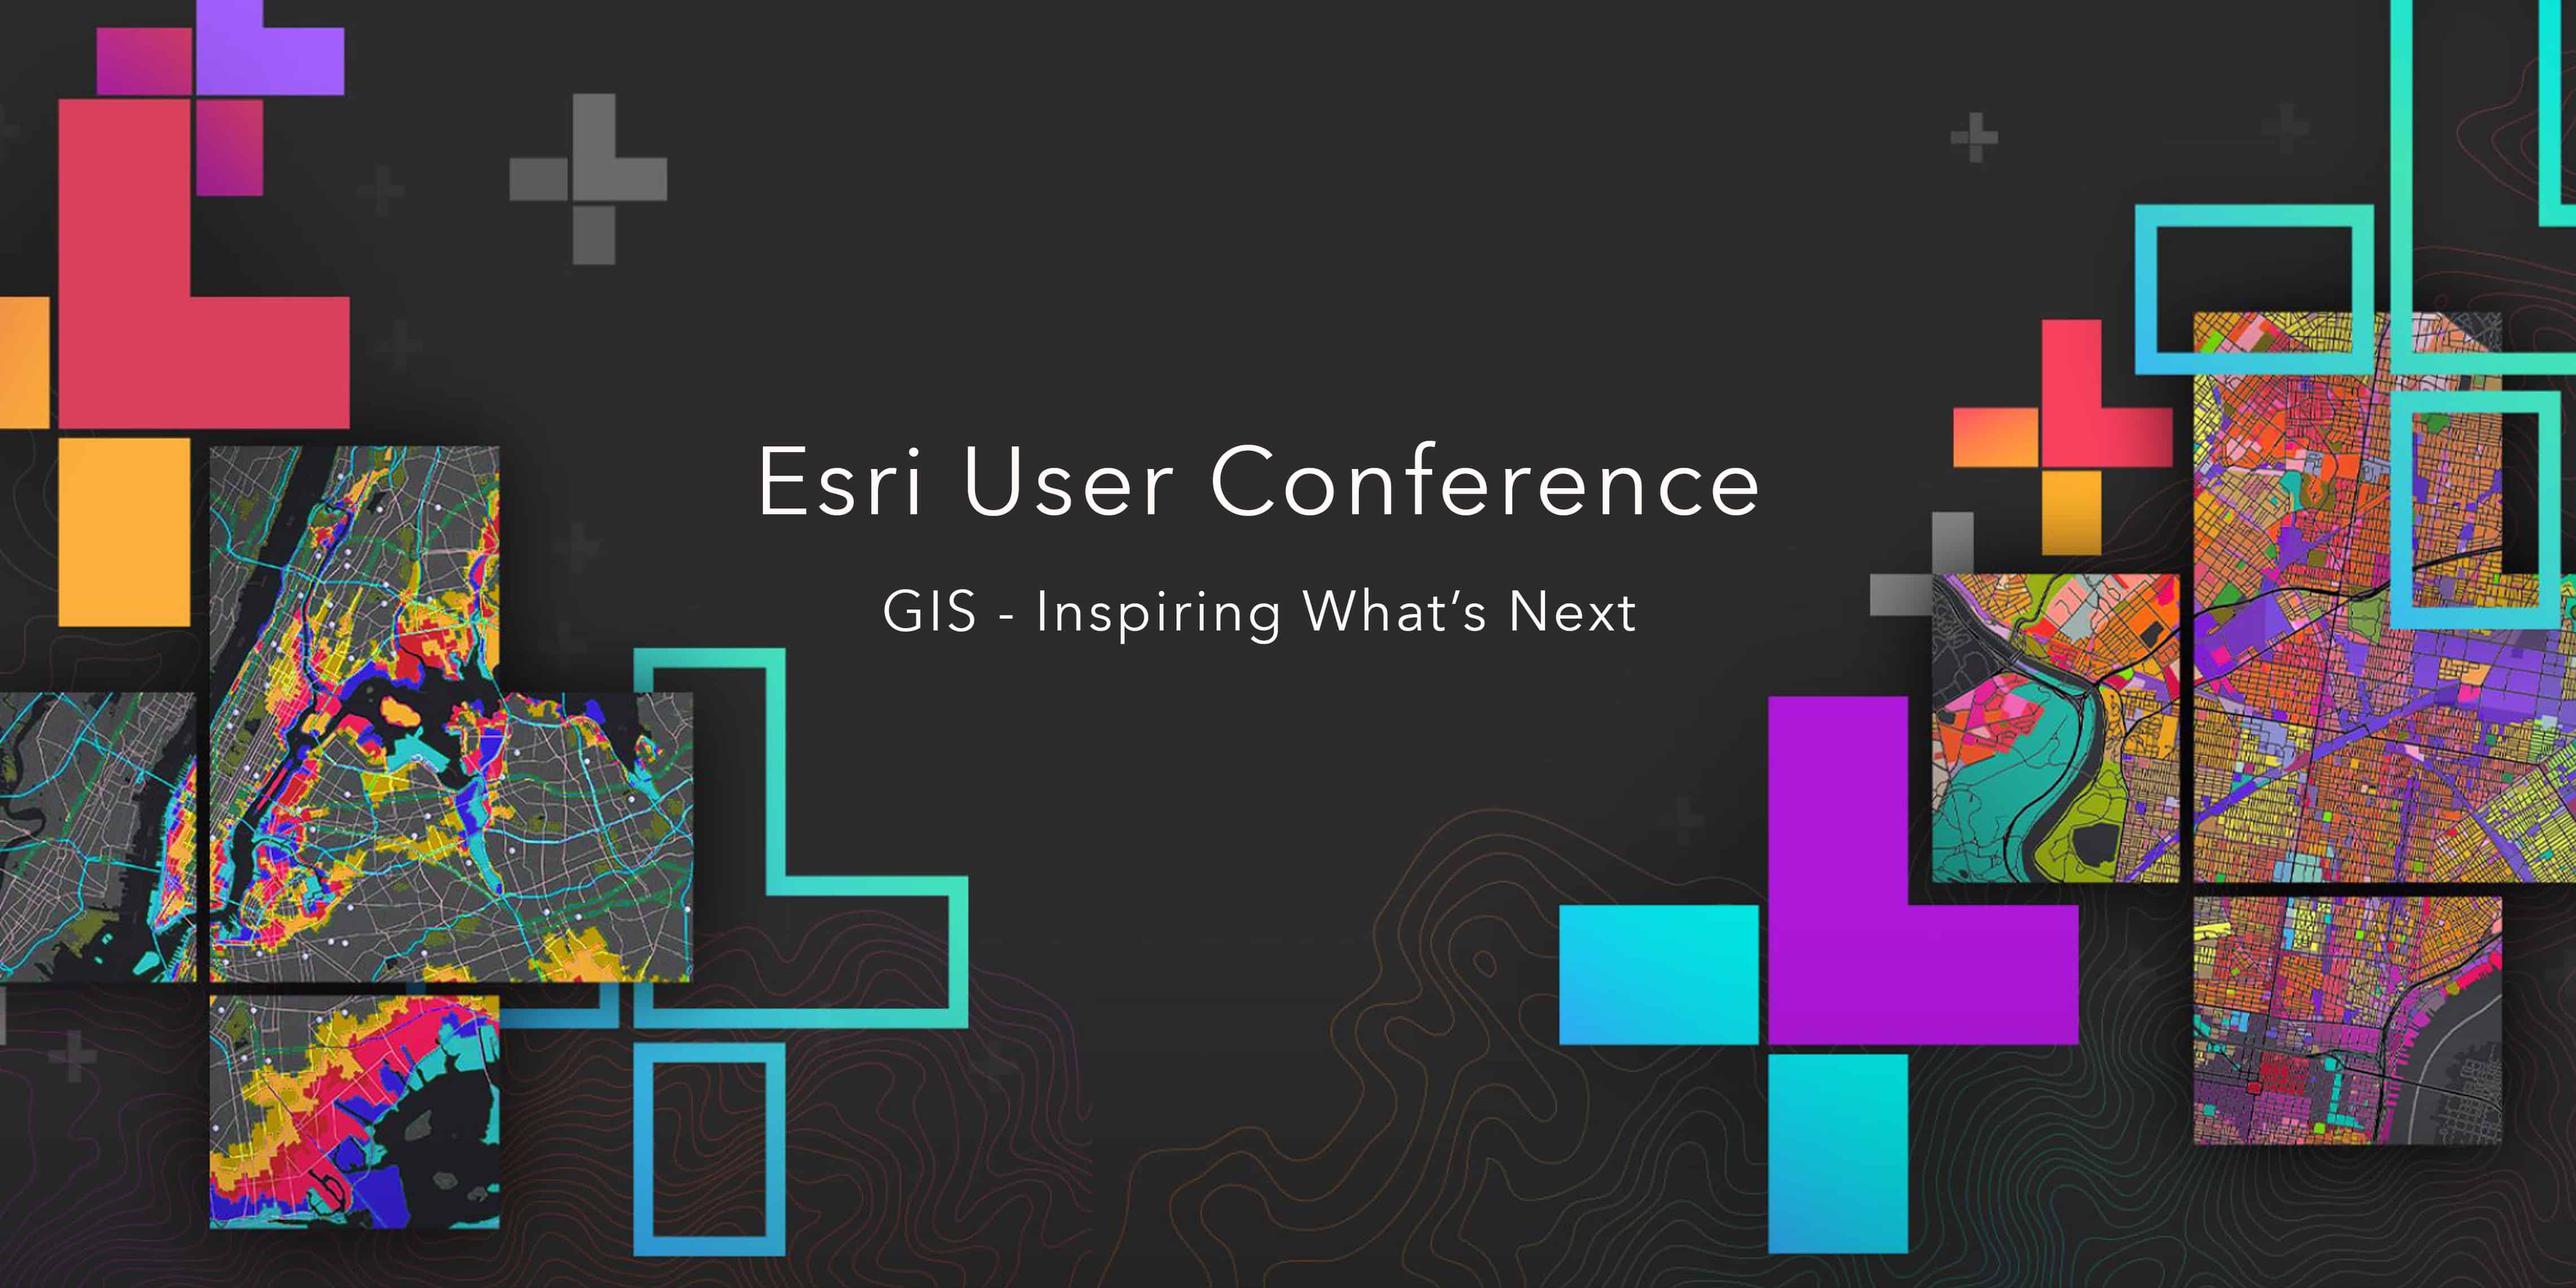 Feature image news ESRI User Conference 2019 San Diego